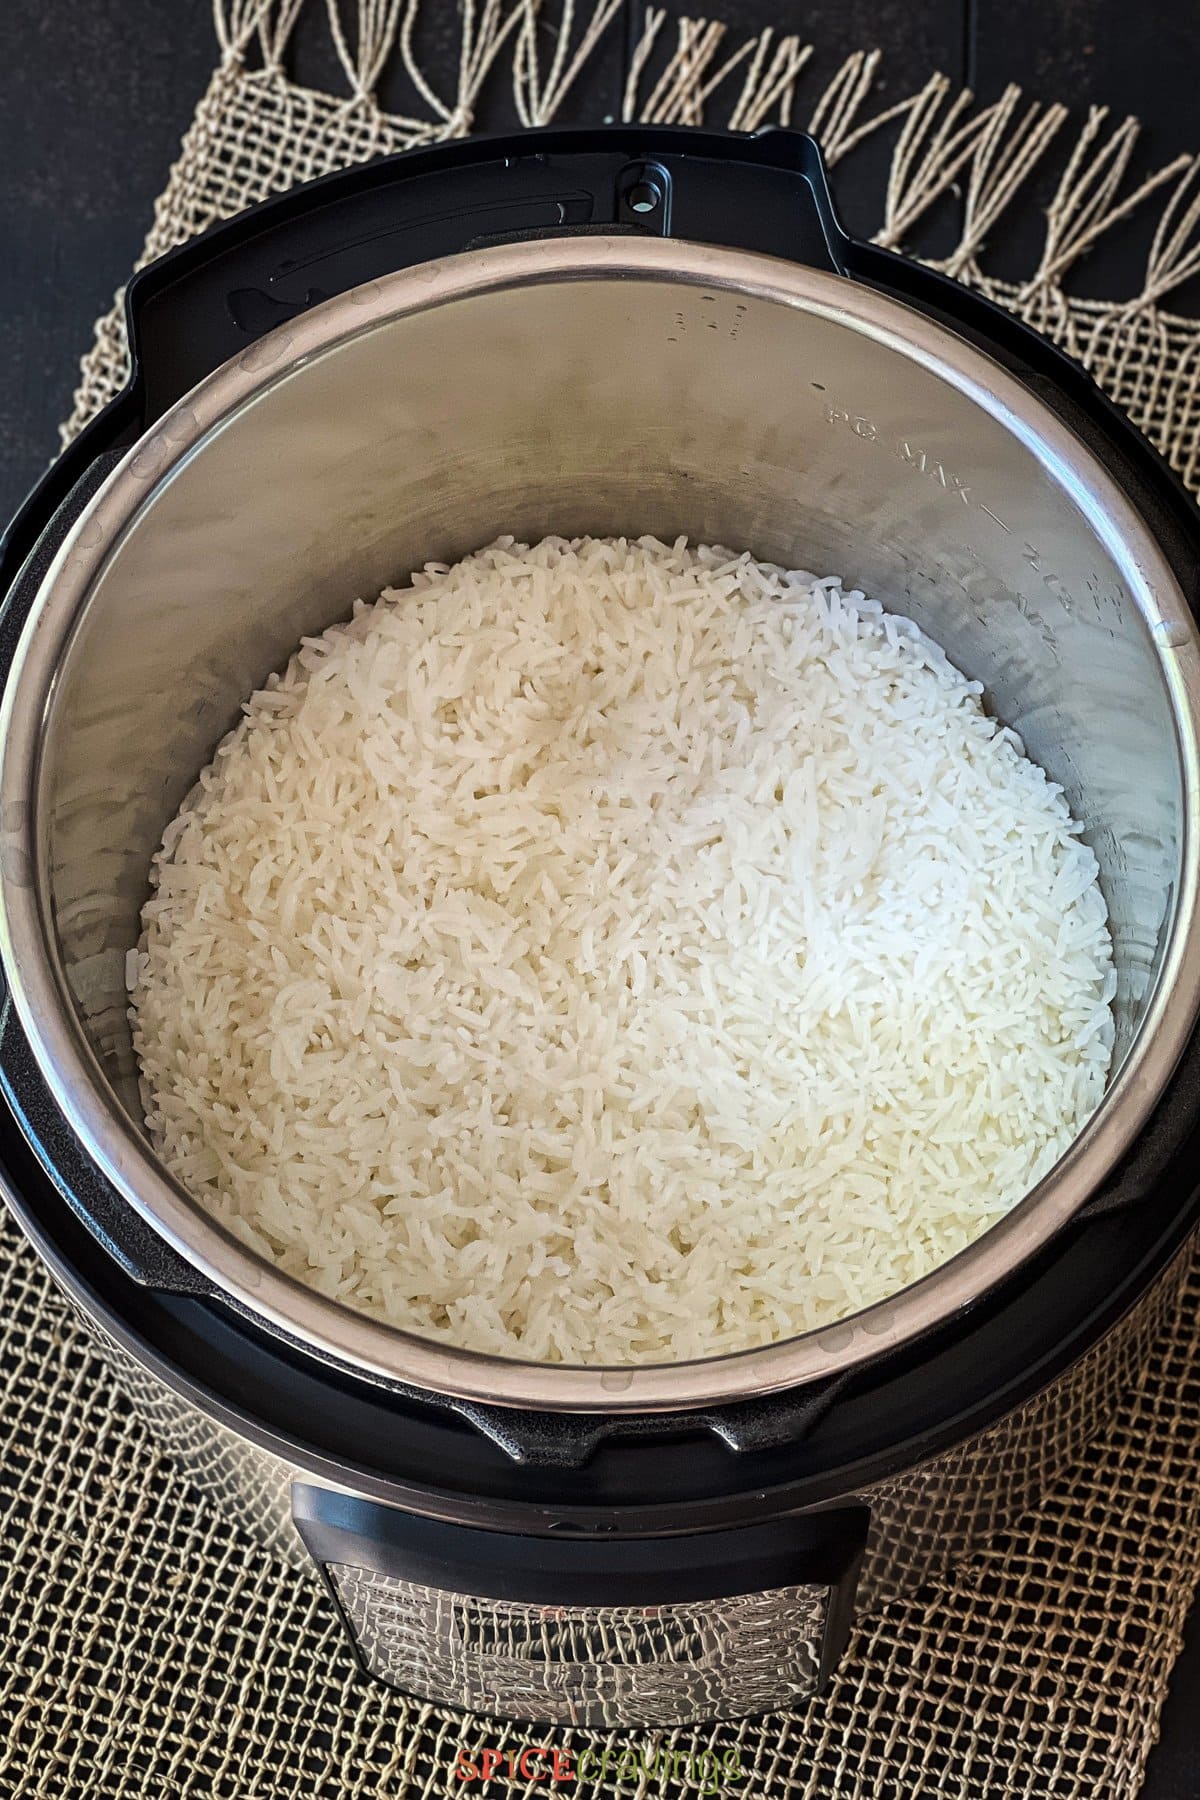 cooked jasmine rice in stainless steel inner pot